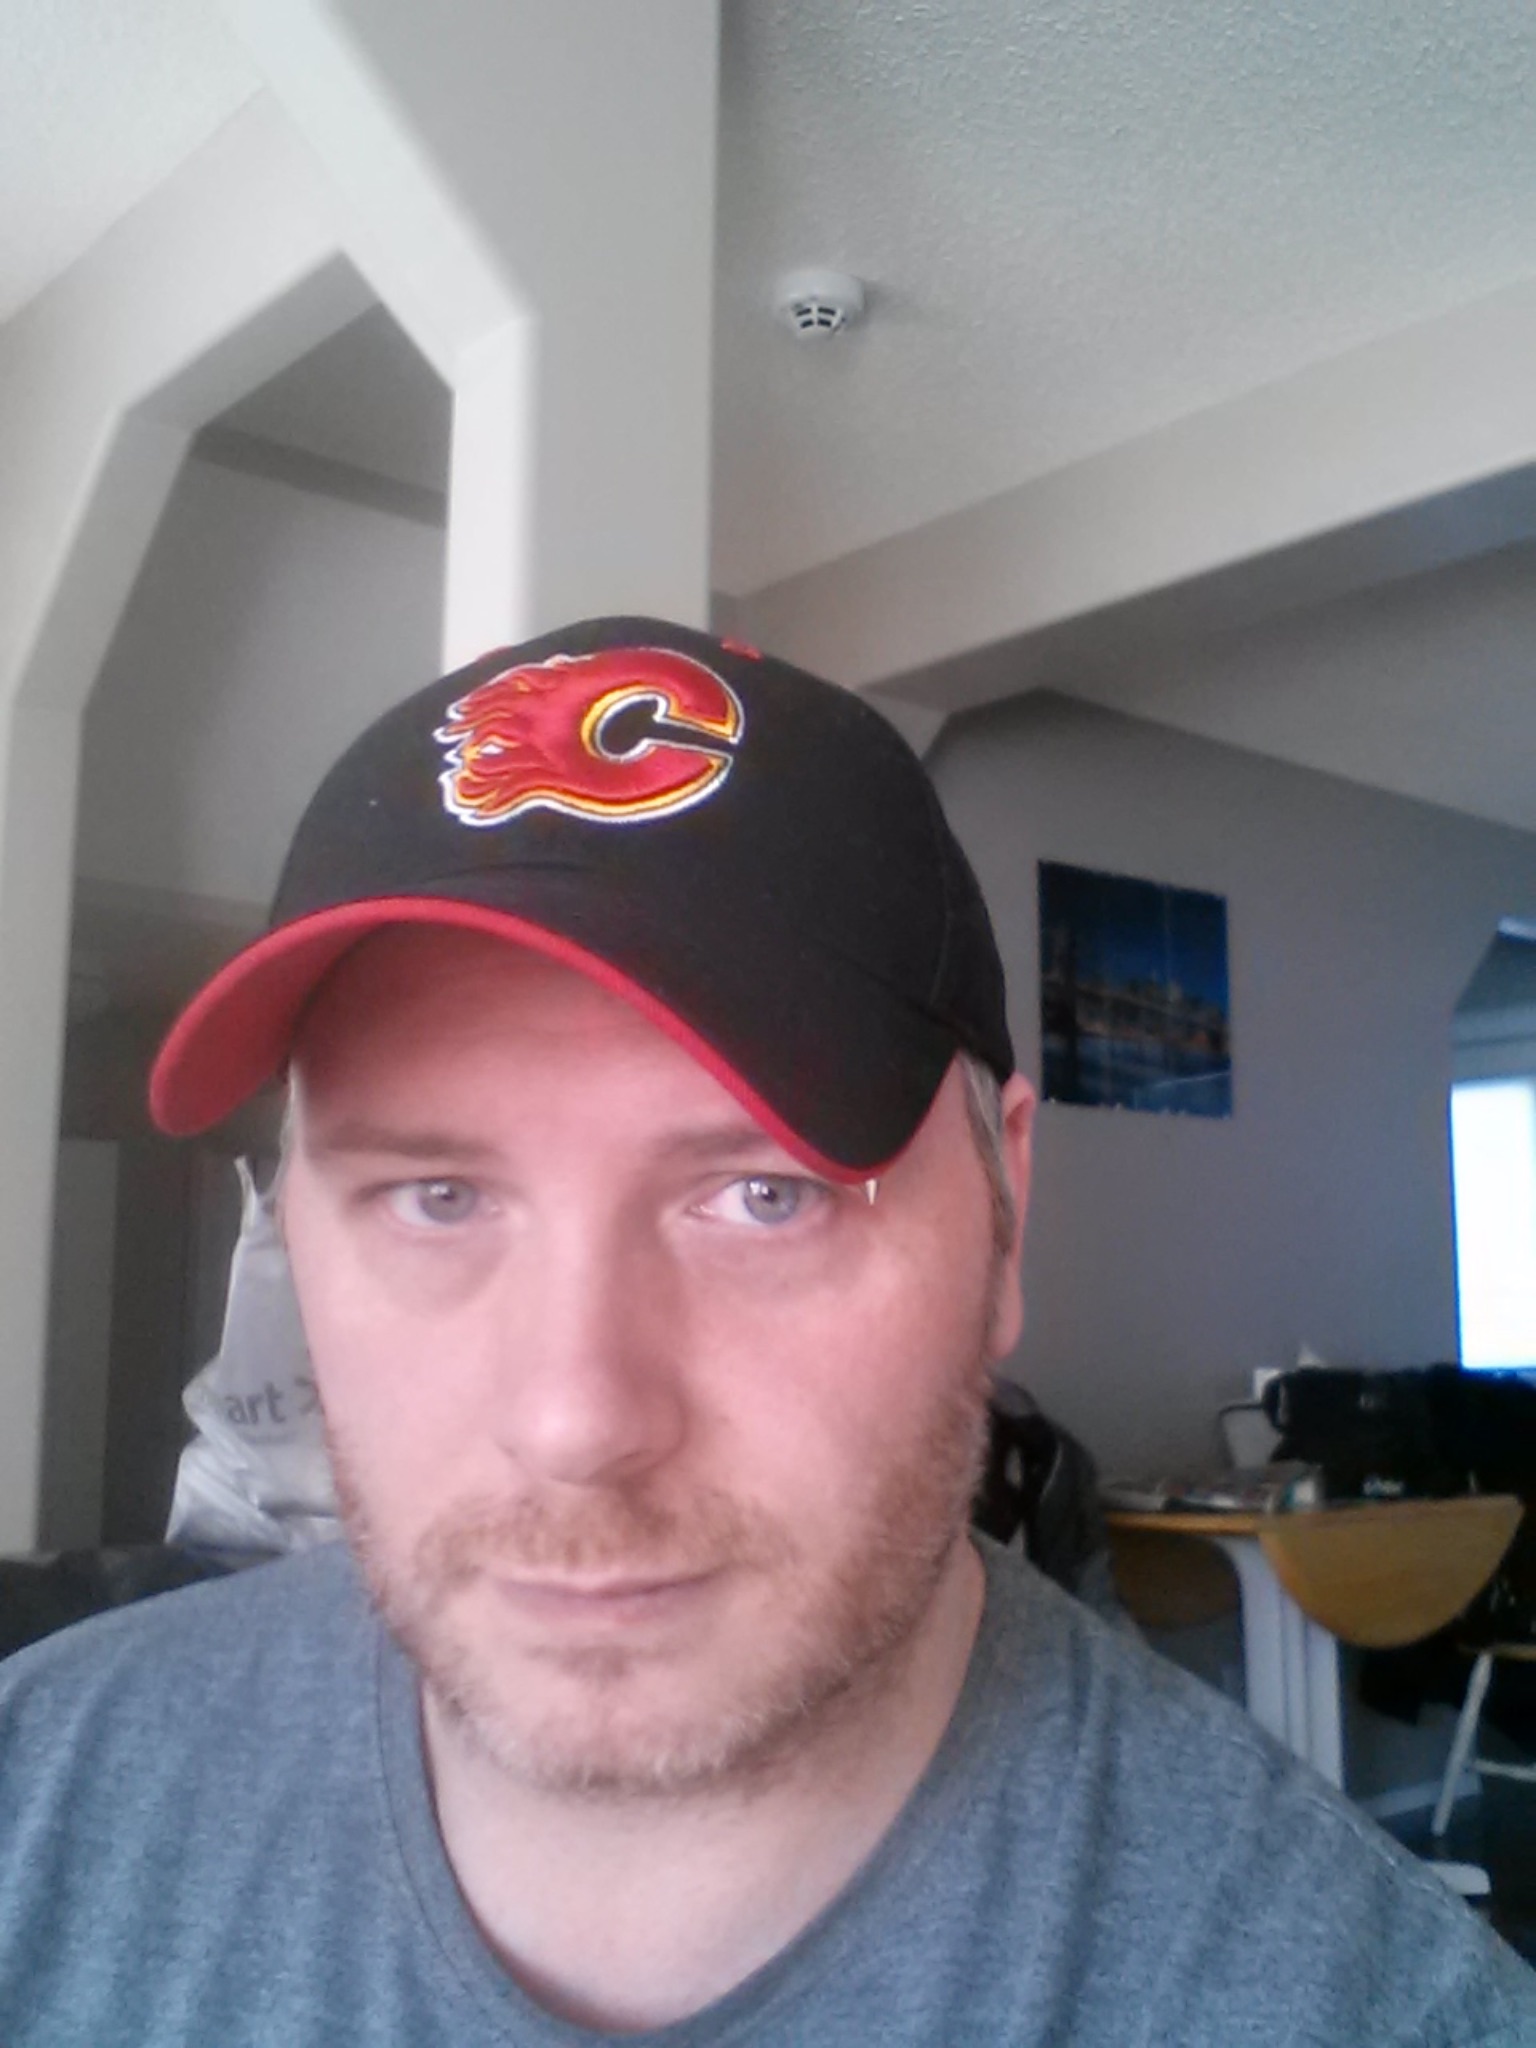 Me showing support for the Flames